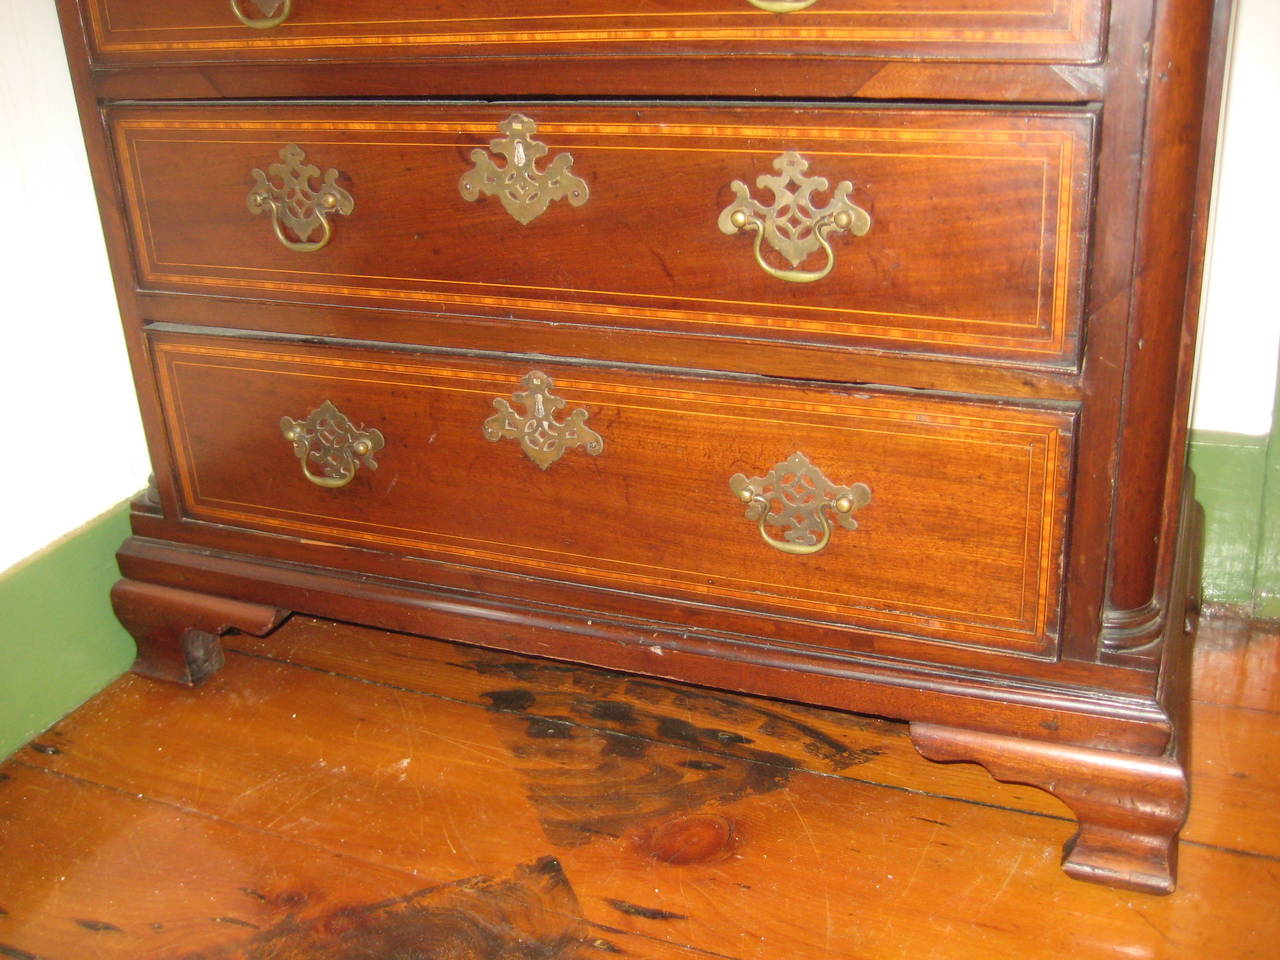 Mahogany Chest of Drawers In Good Condition For Sale In Nantucket, MA